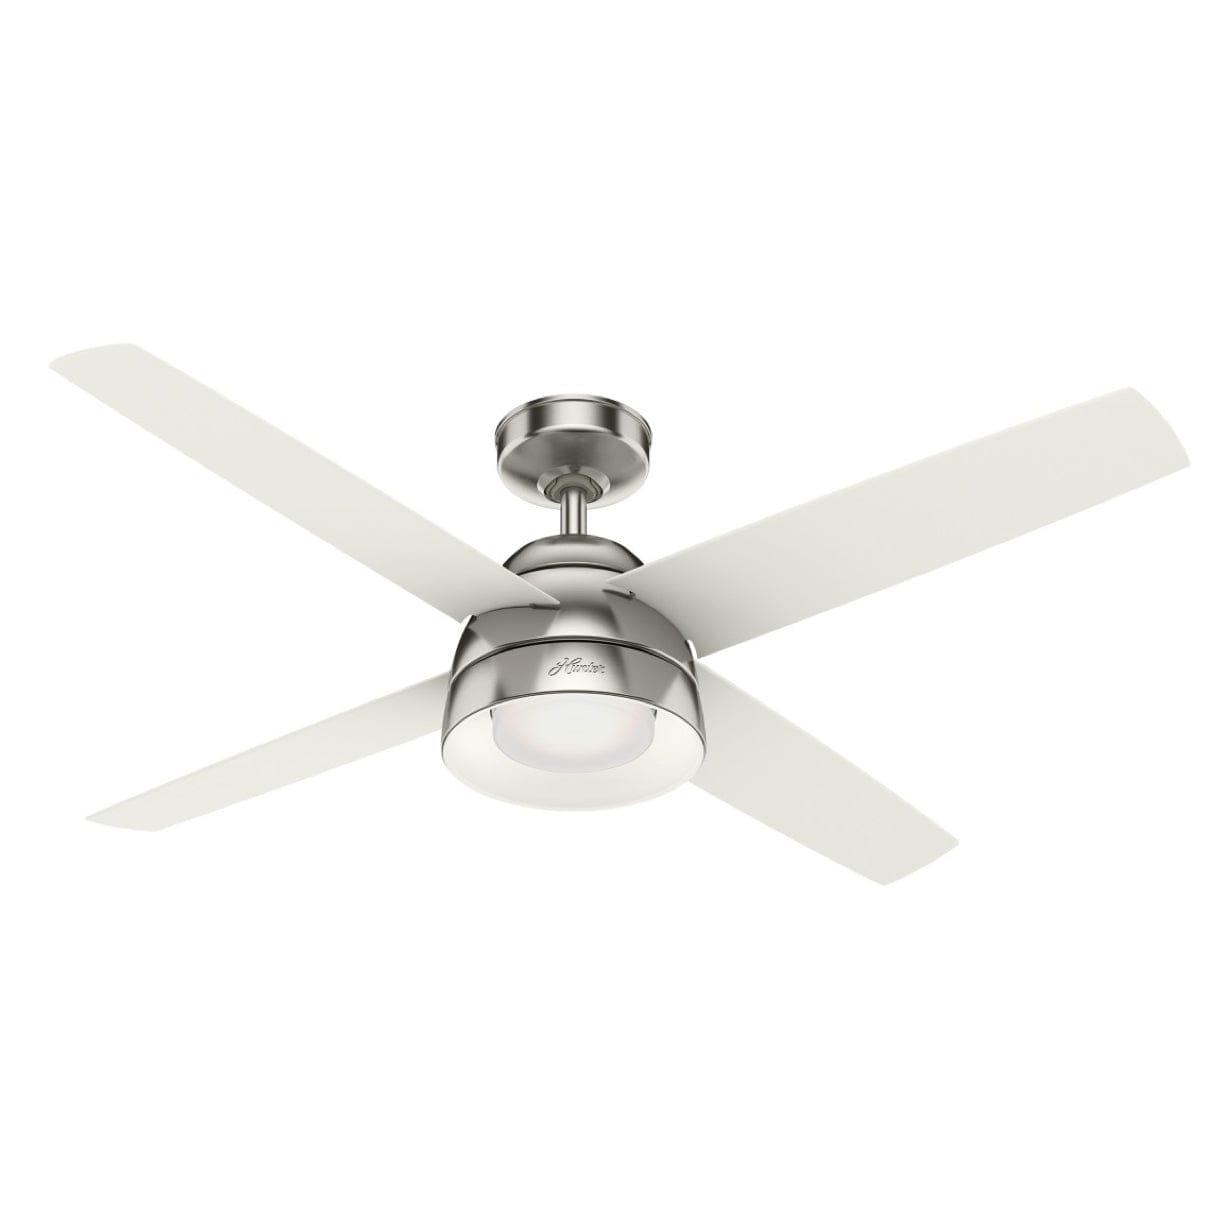 Vicenza ceiling fan in brushed nickel finish